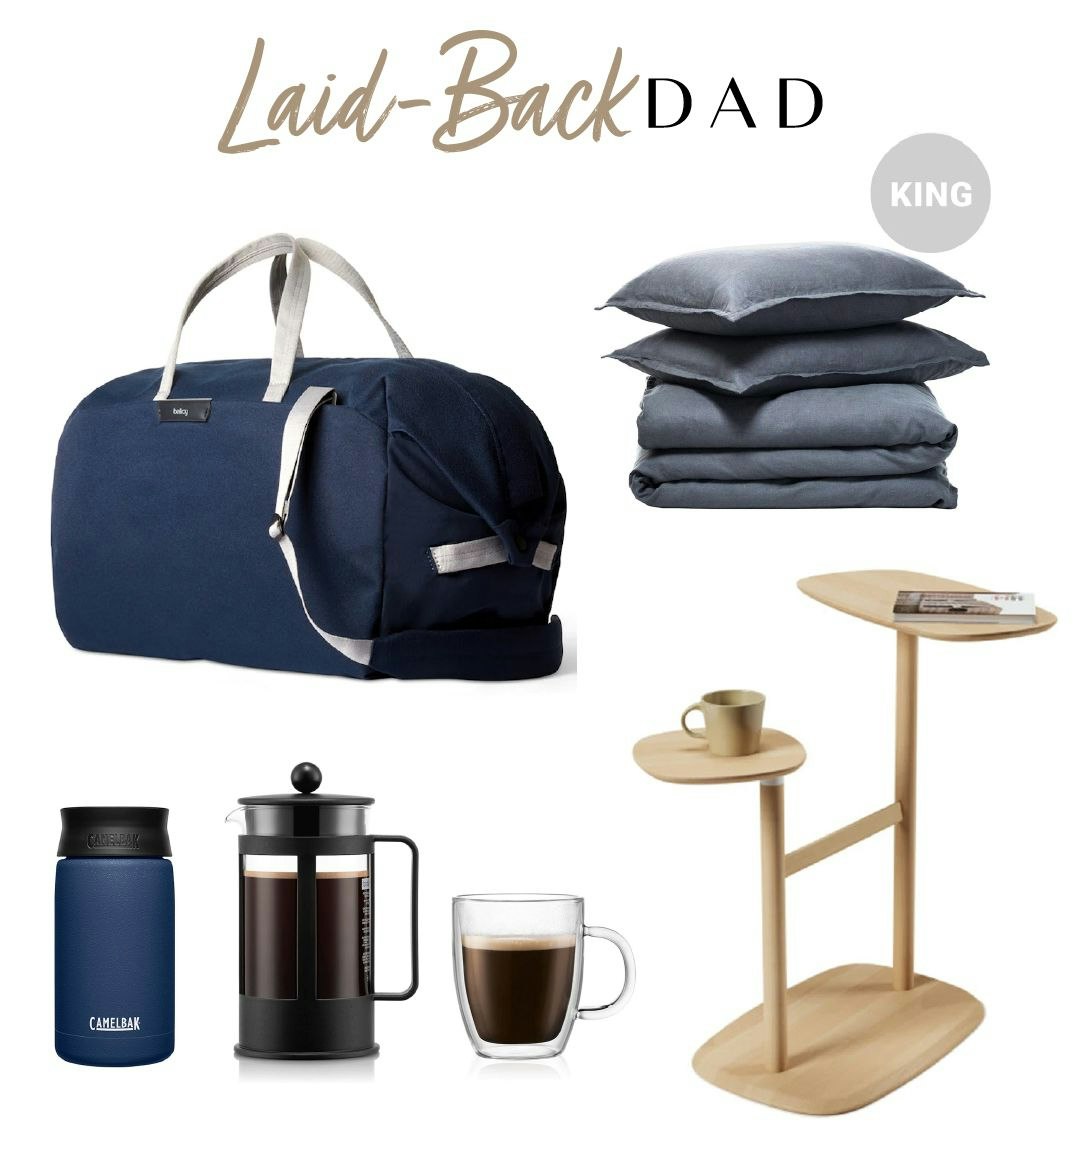 Products picked for a Laid-Back Dad